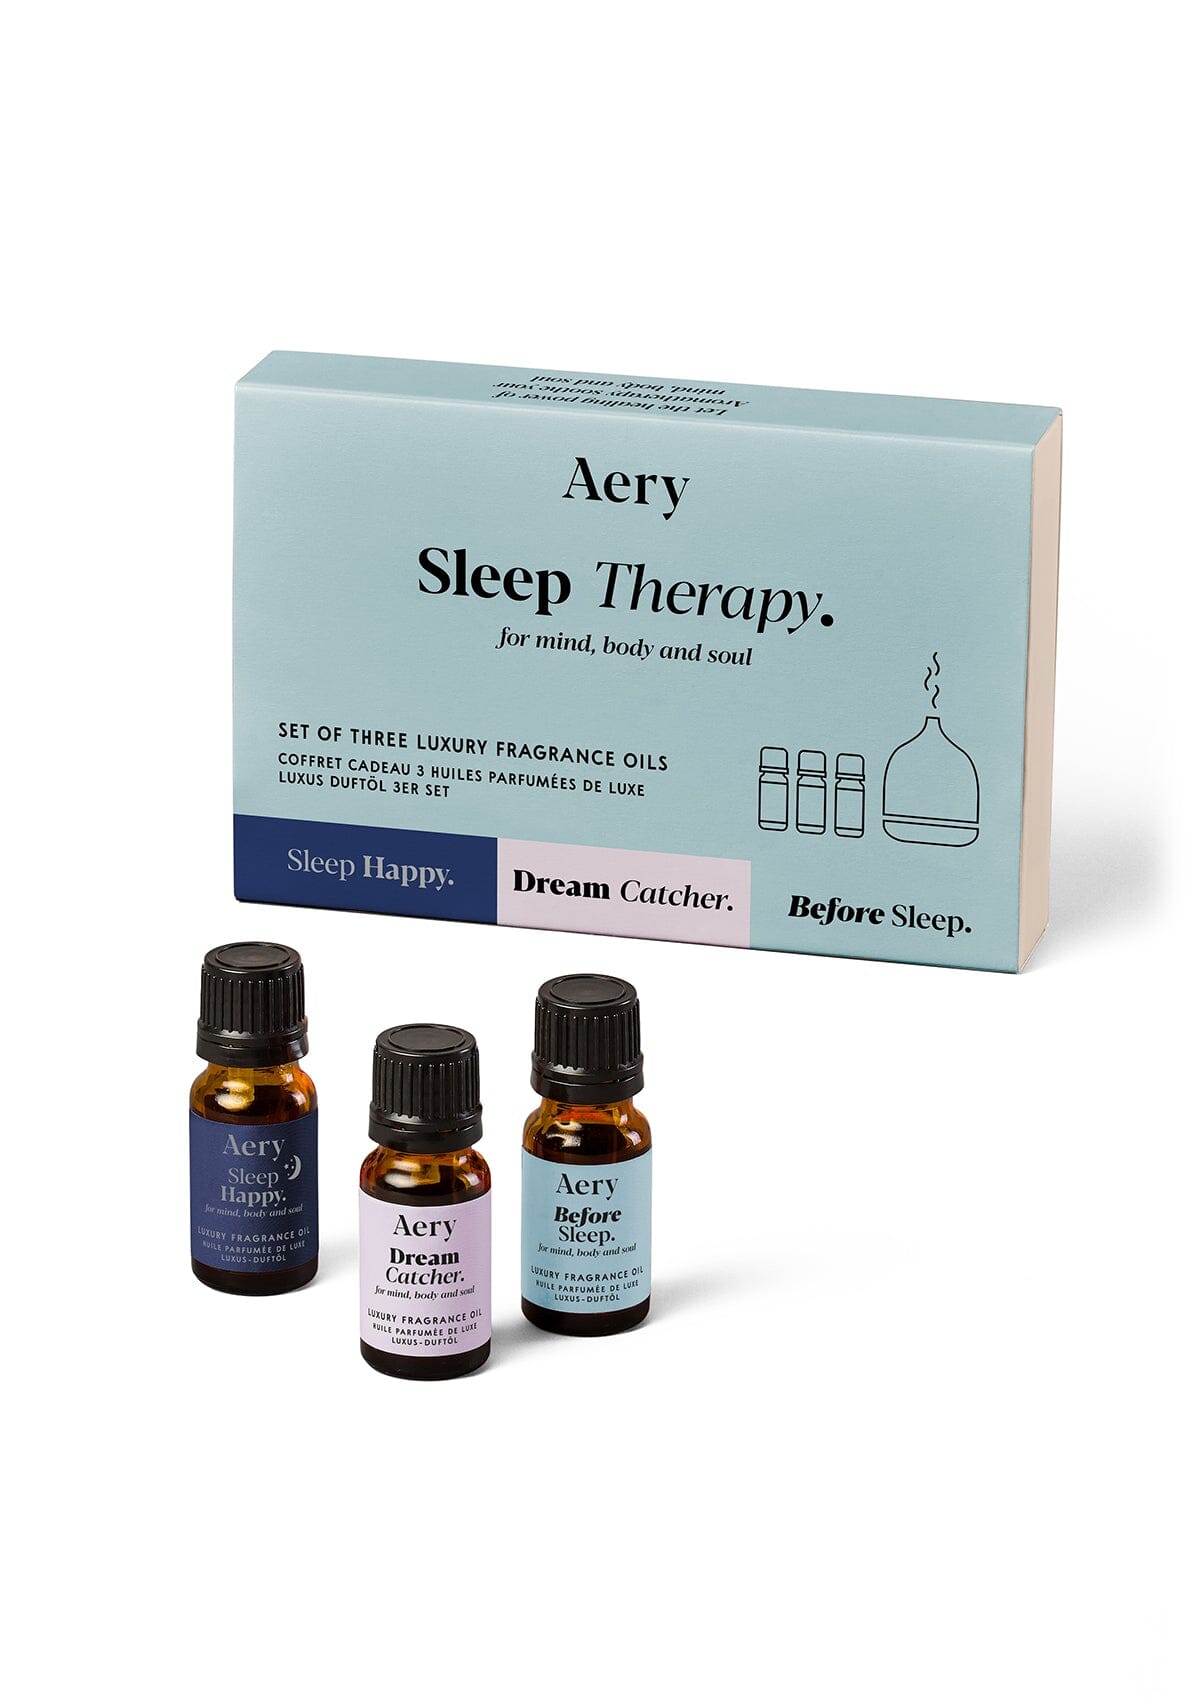 Blue Sleep Therapy Fragrance oil set of three displayed next to product packaging by Aery on white background 